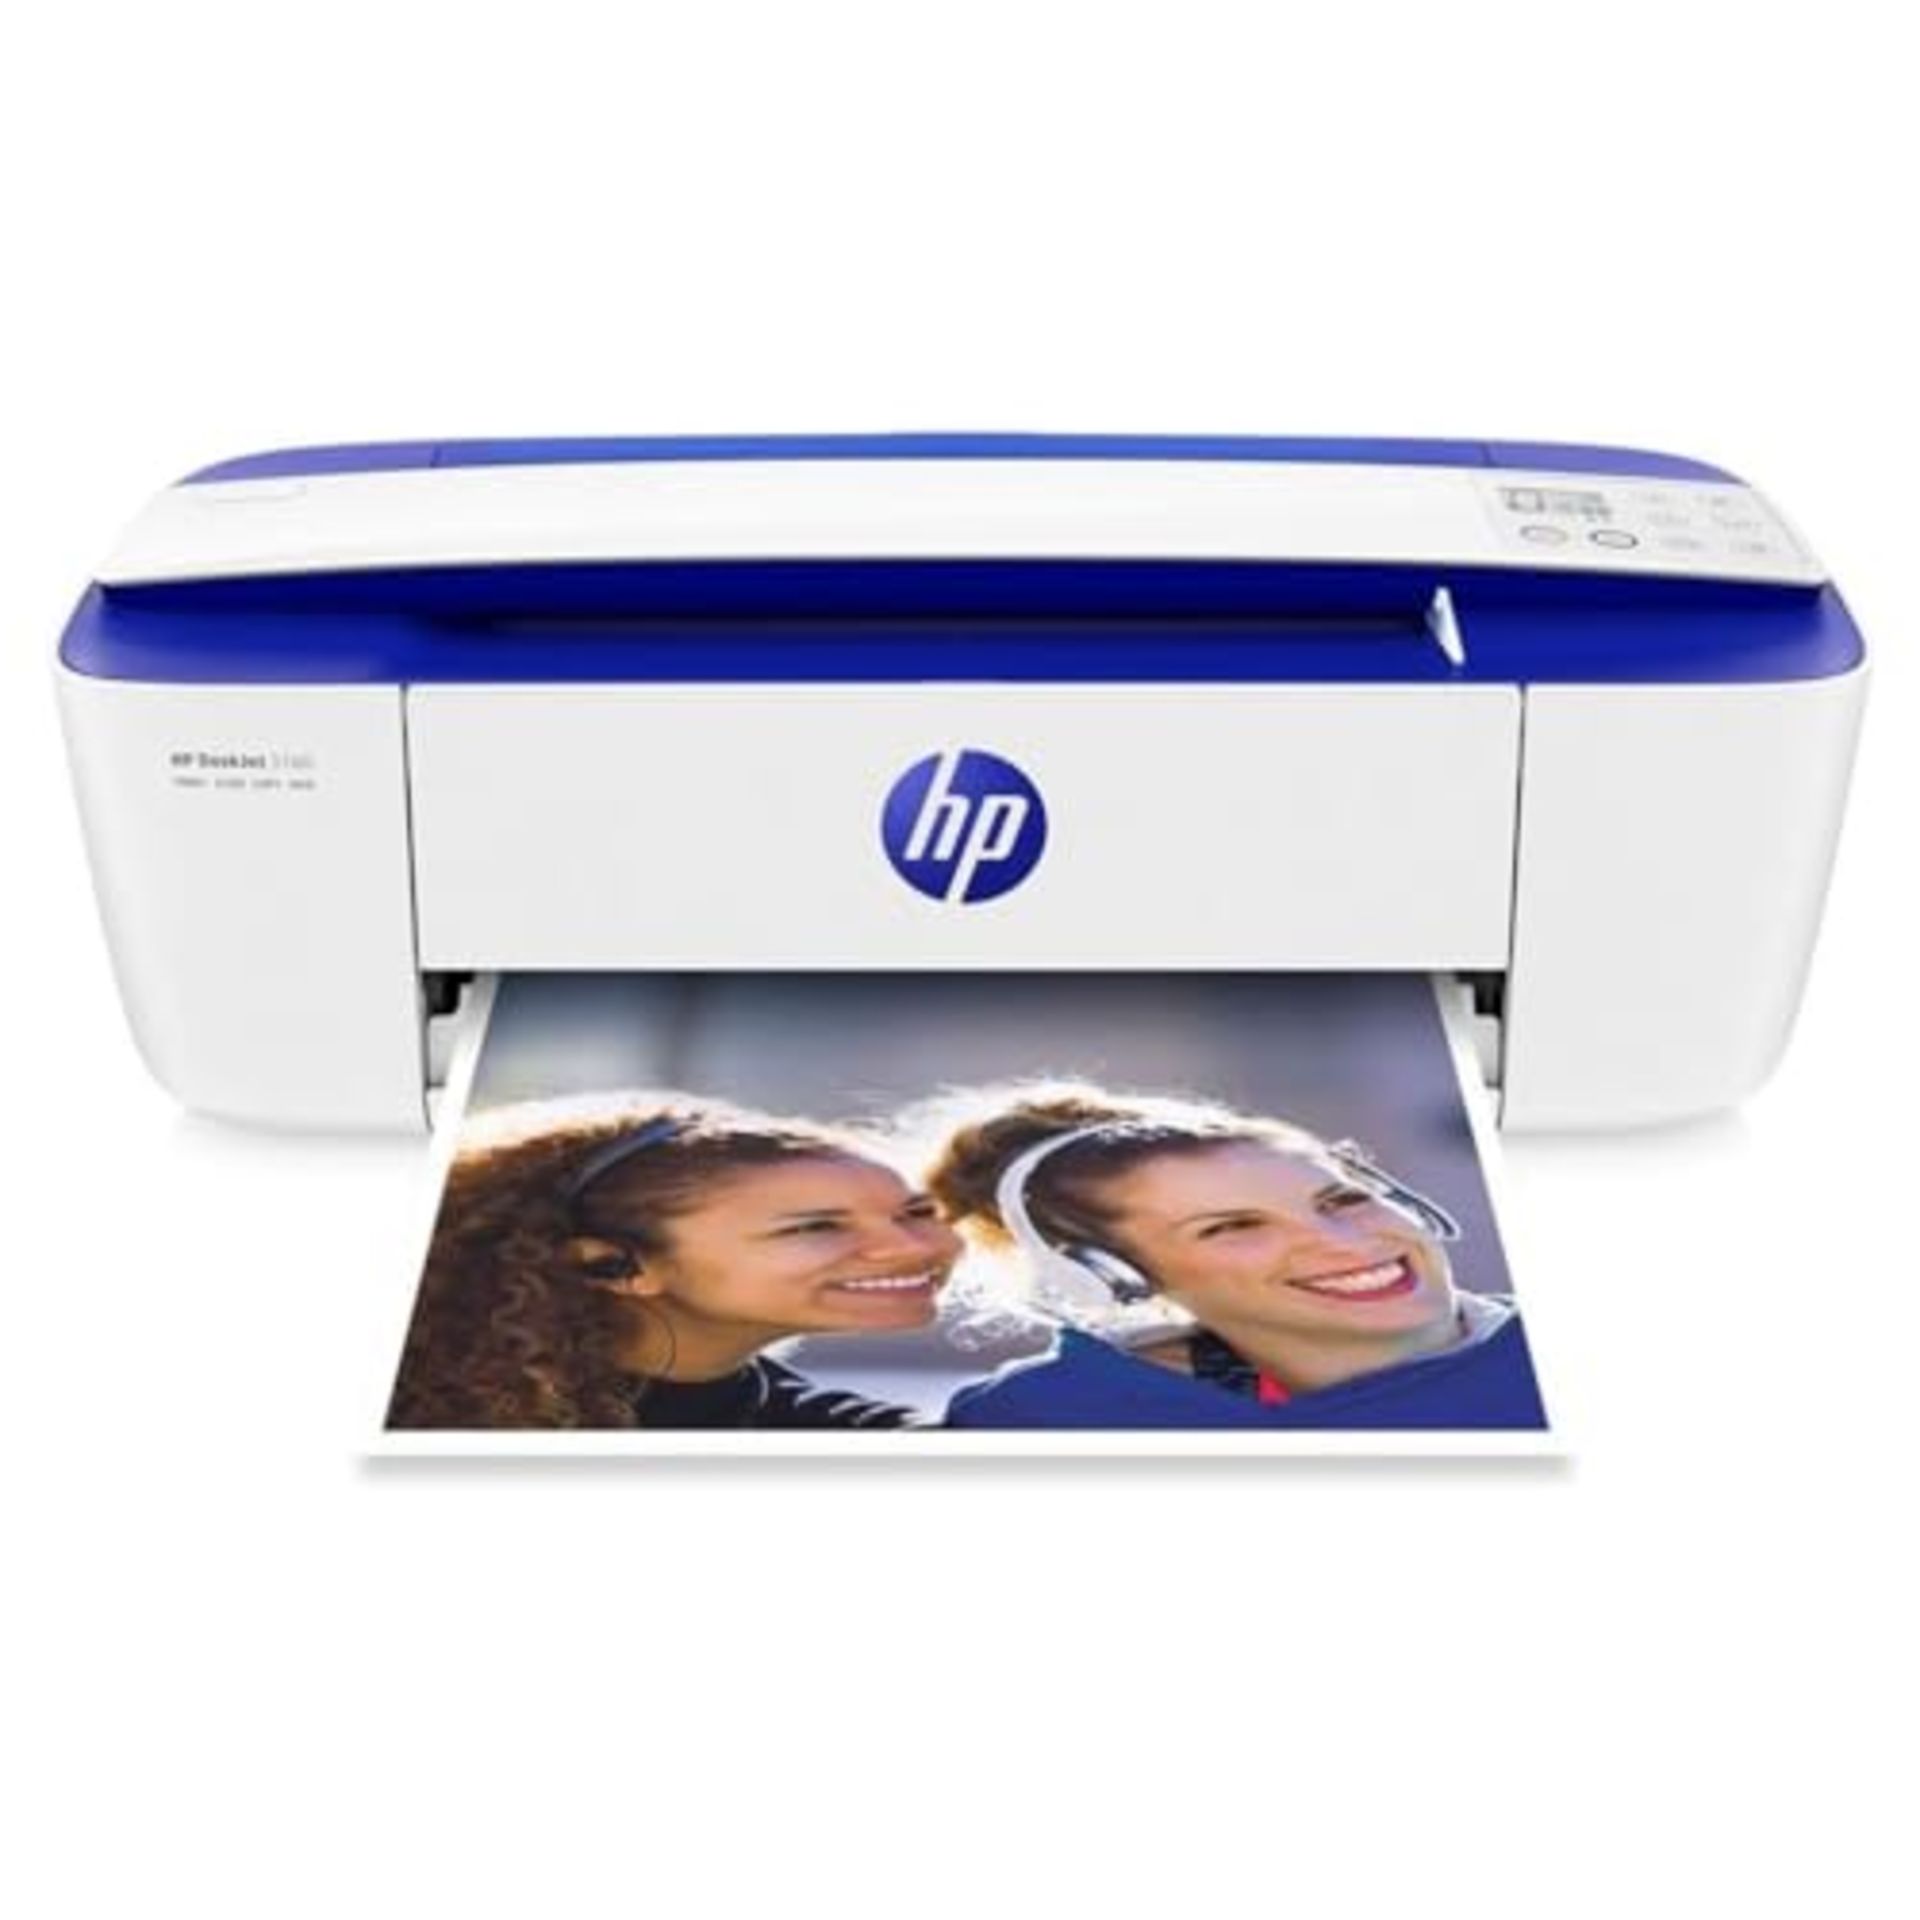 RRP £64.00 [NEW] HP DeskJet 3760 multifunction printer - print for free for 4 months with HP Inst